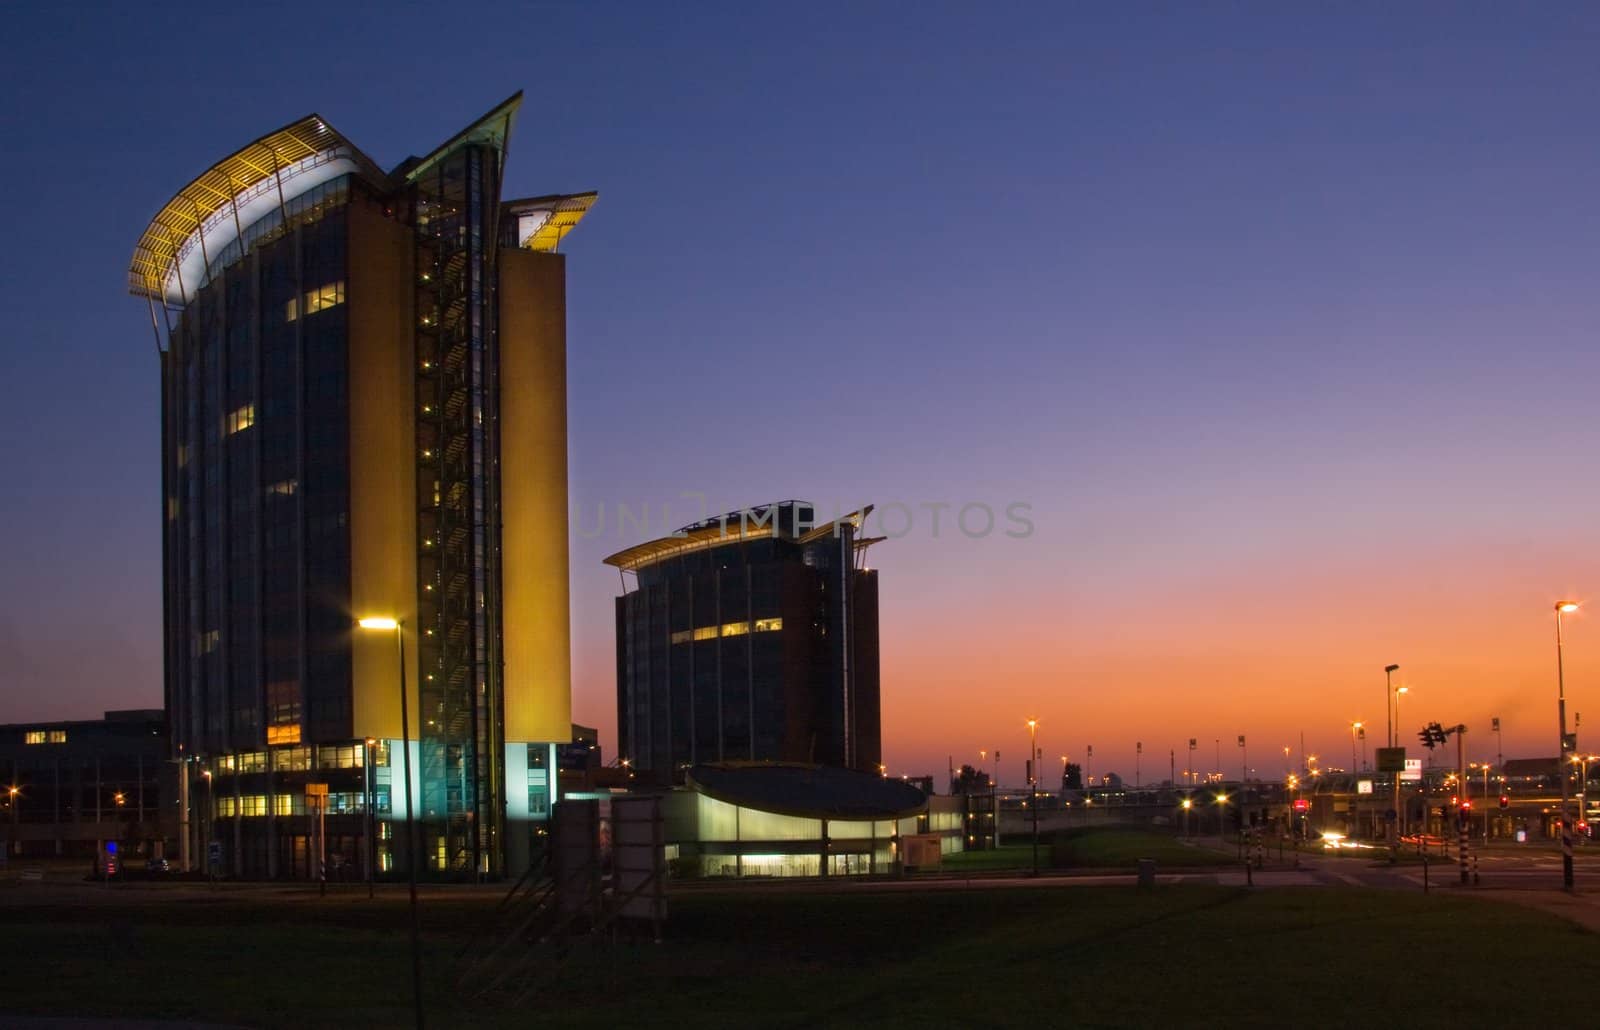 Architecture by night-Modern office buildings at sunset